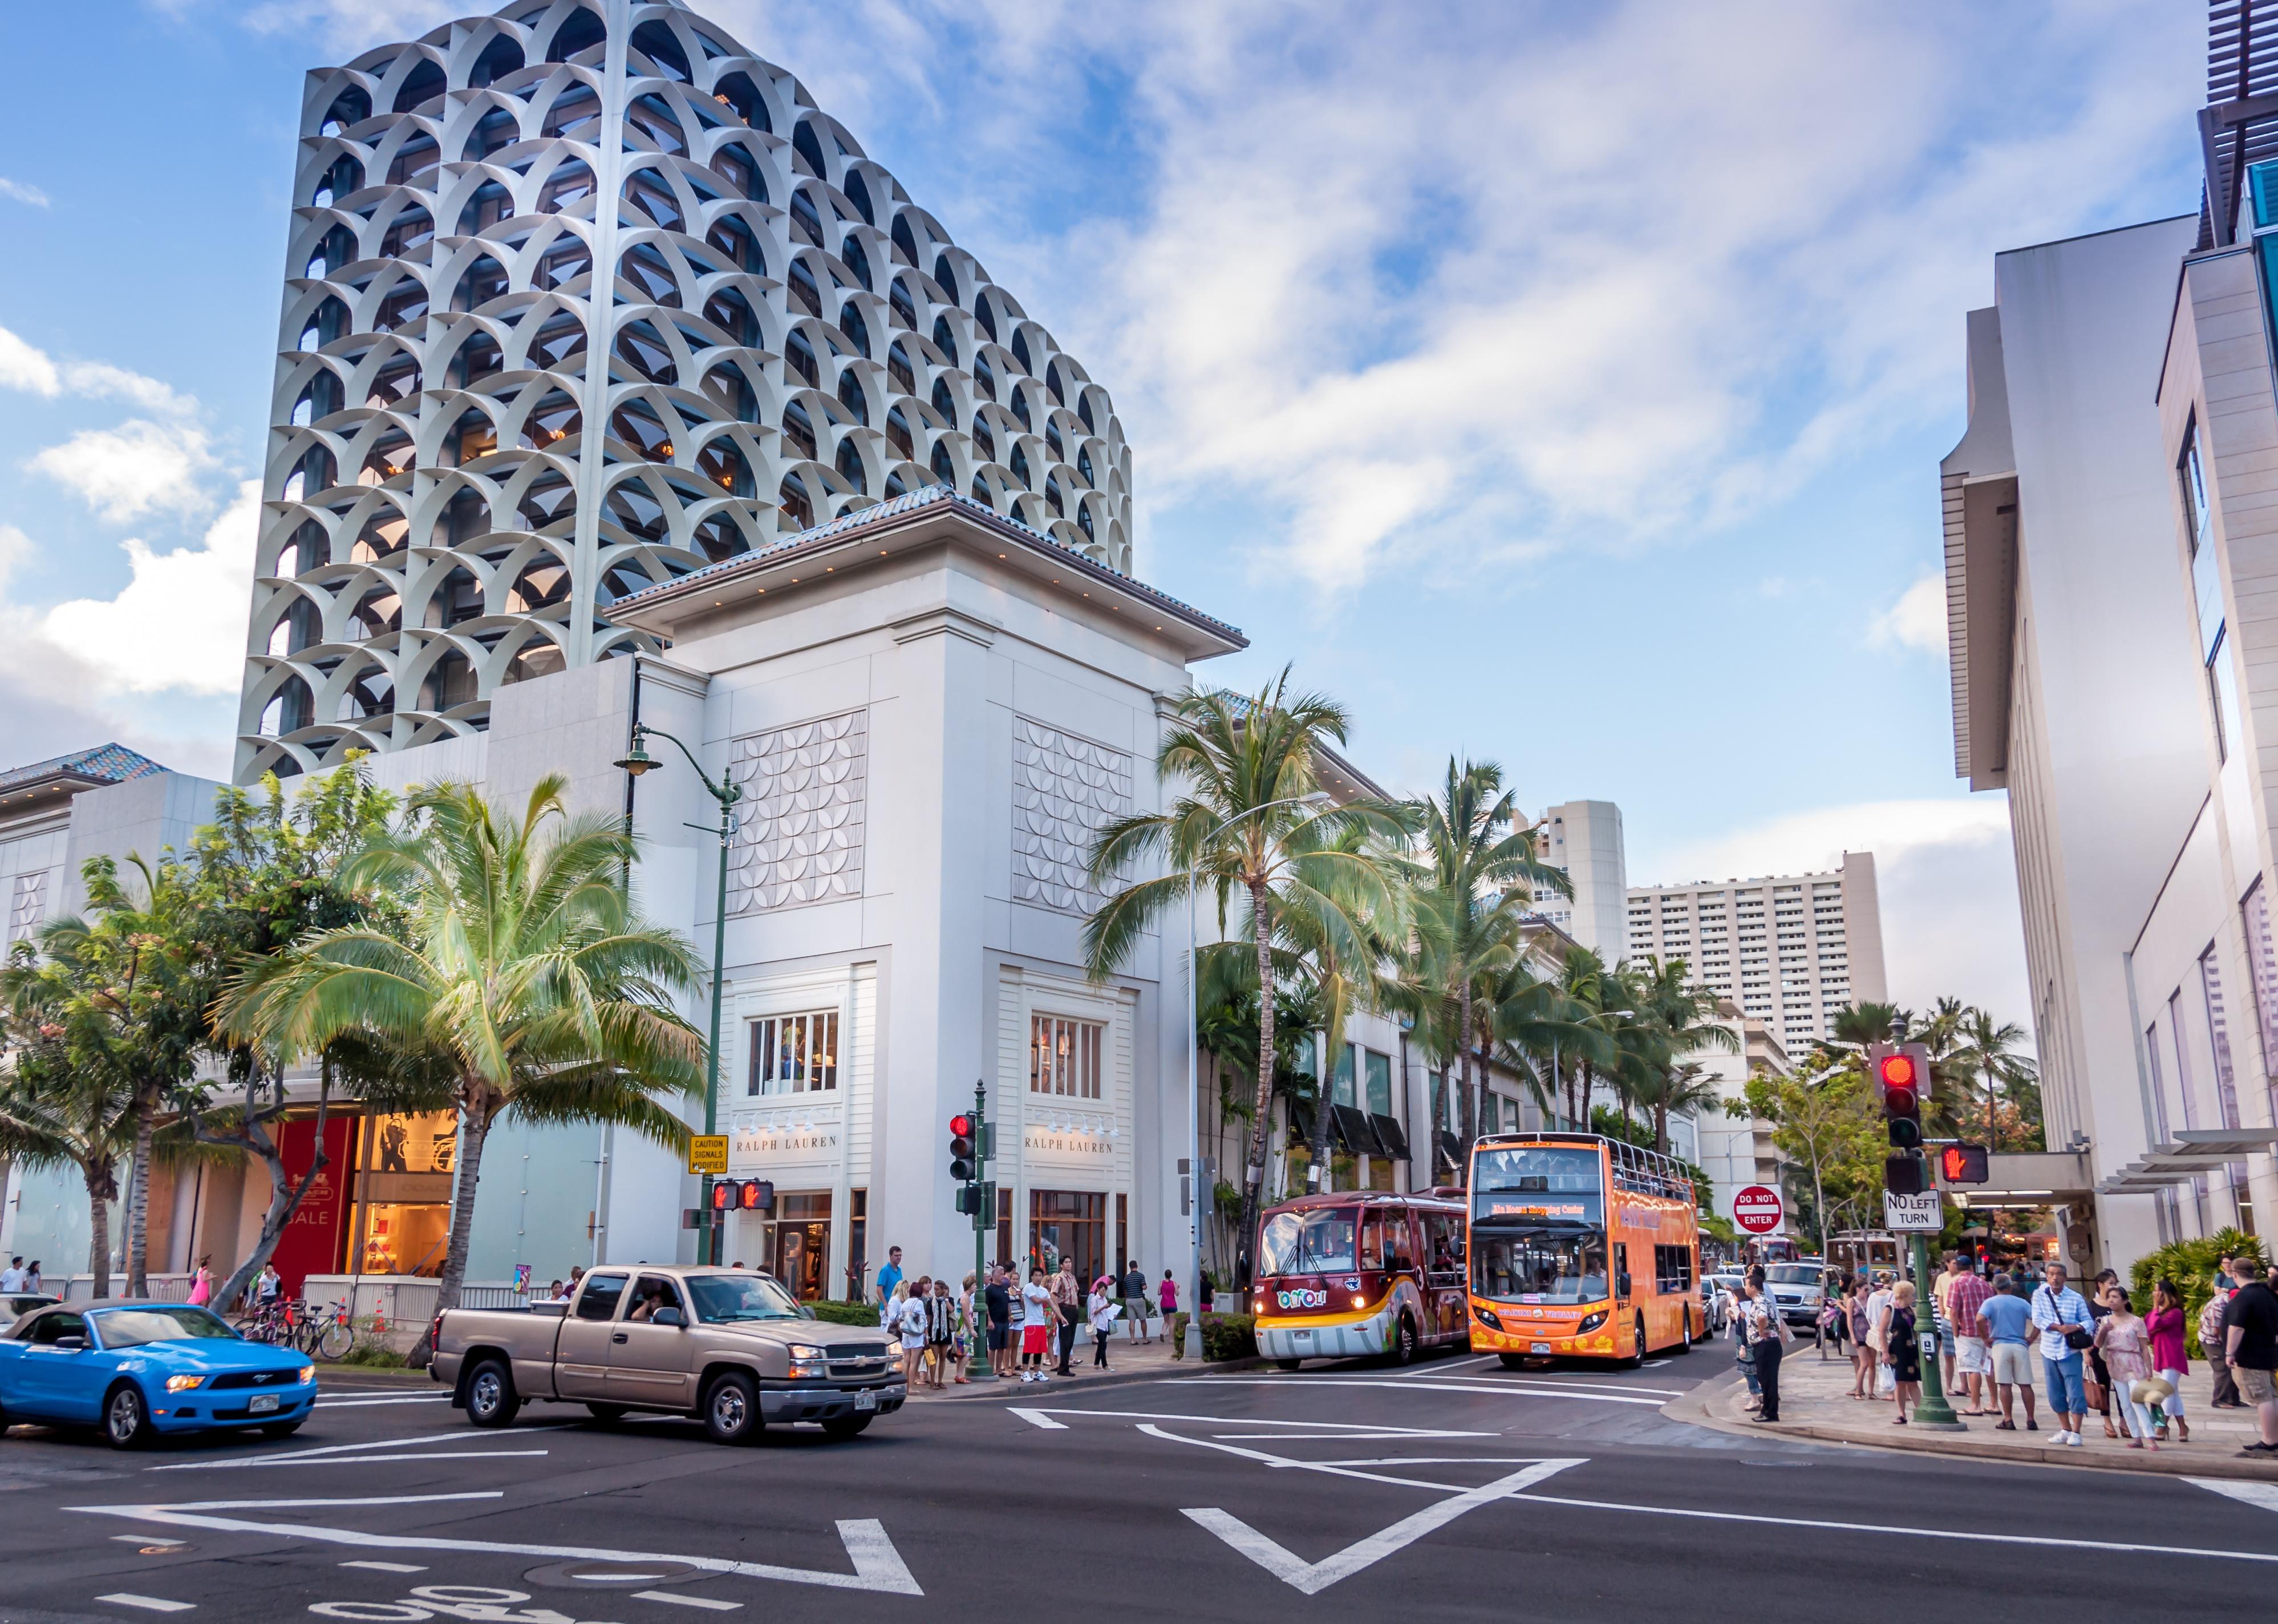 Busy intersection in the evening along the famous Kalakaua shopping district